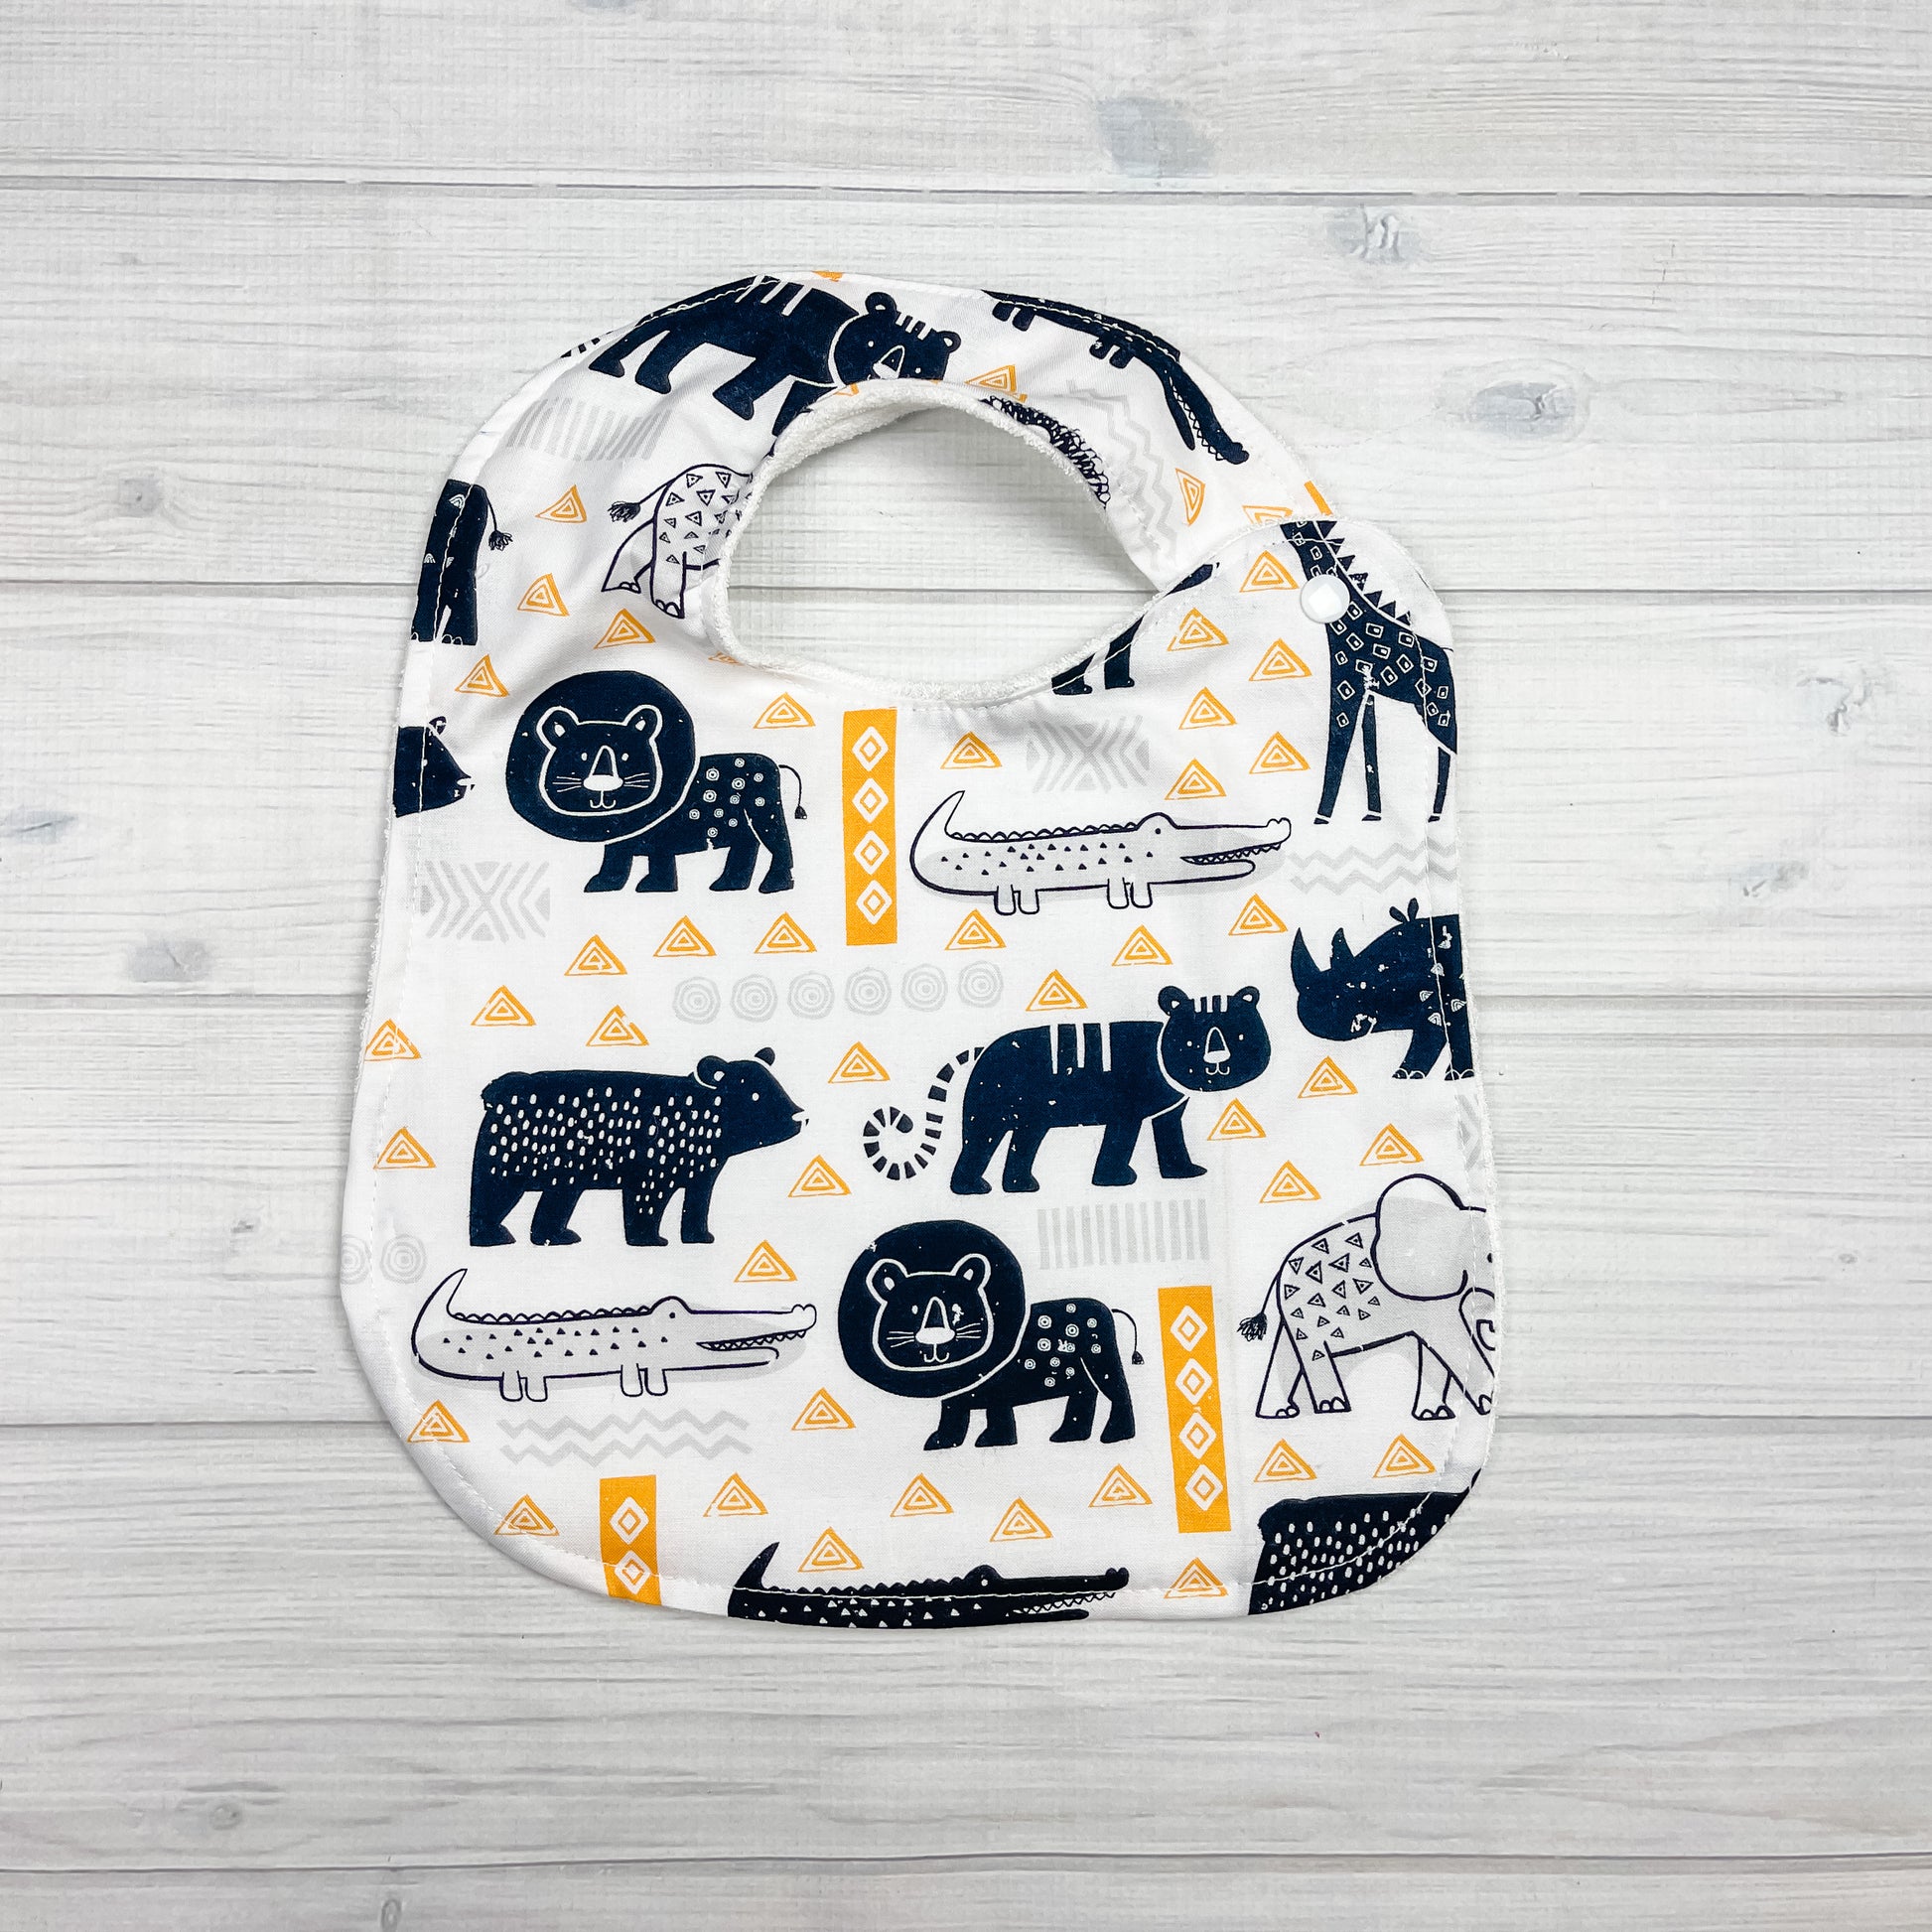 Generously sized infant/toddler bib. White background with black and white lions, giraffes, alligators, elephants and bears. accented with yellow and light gray geometric shapes. 